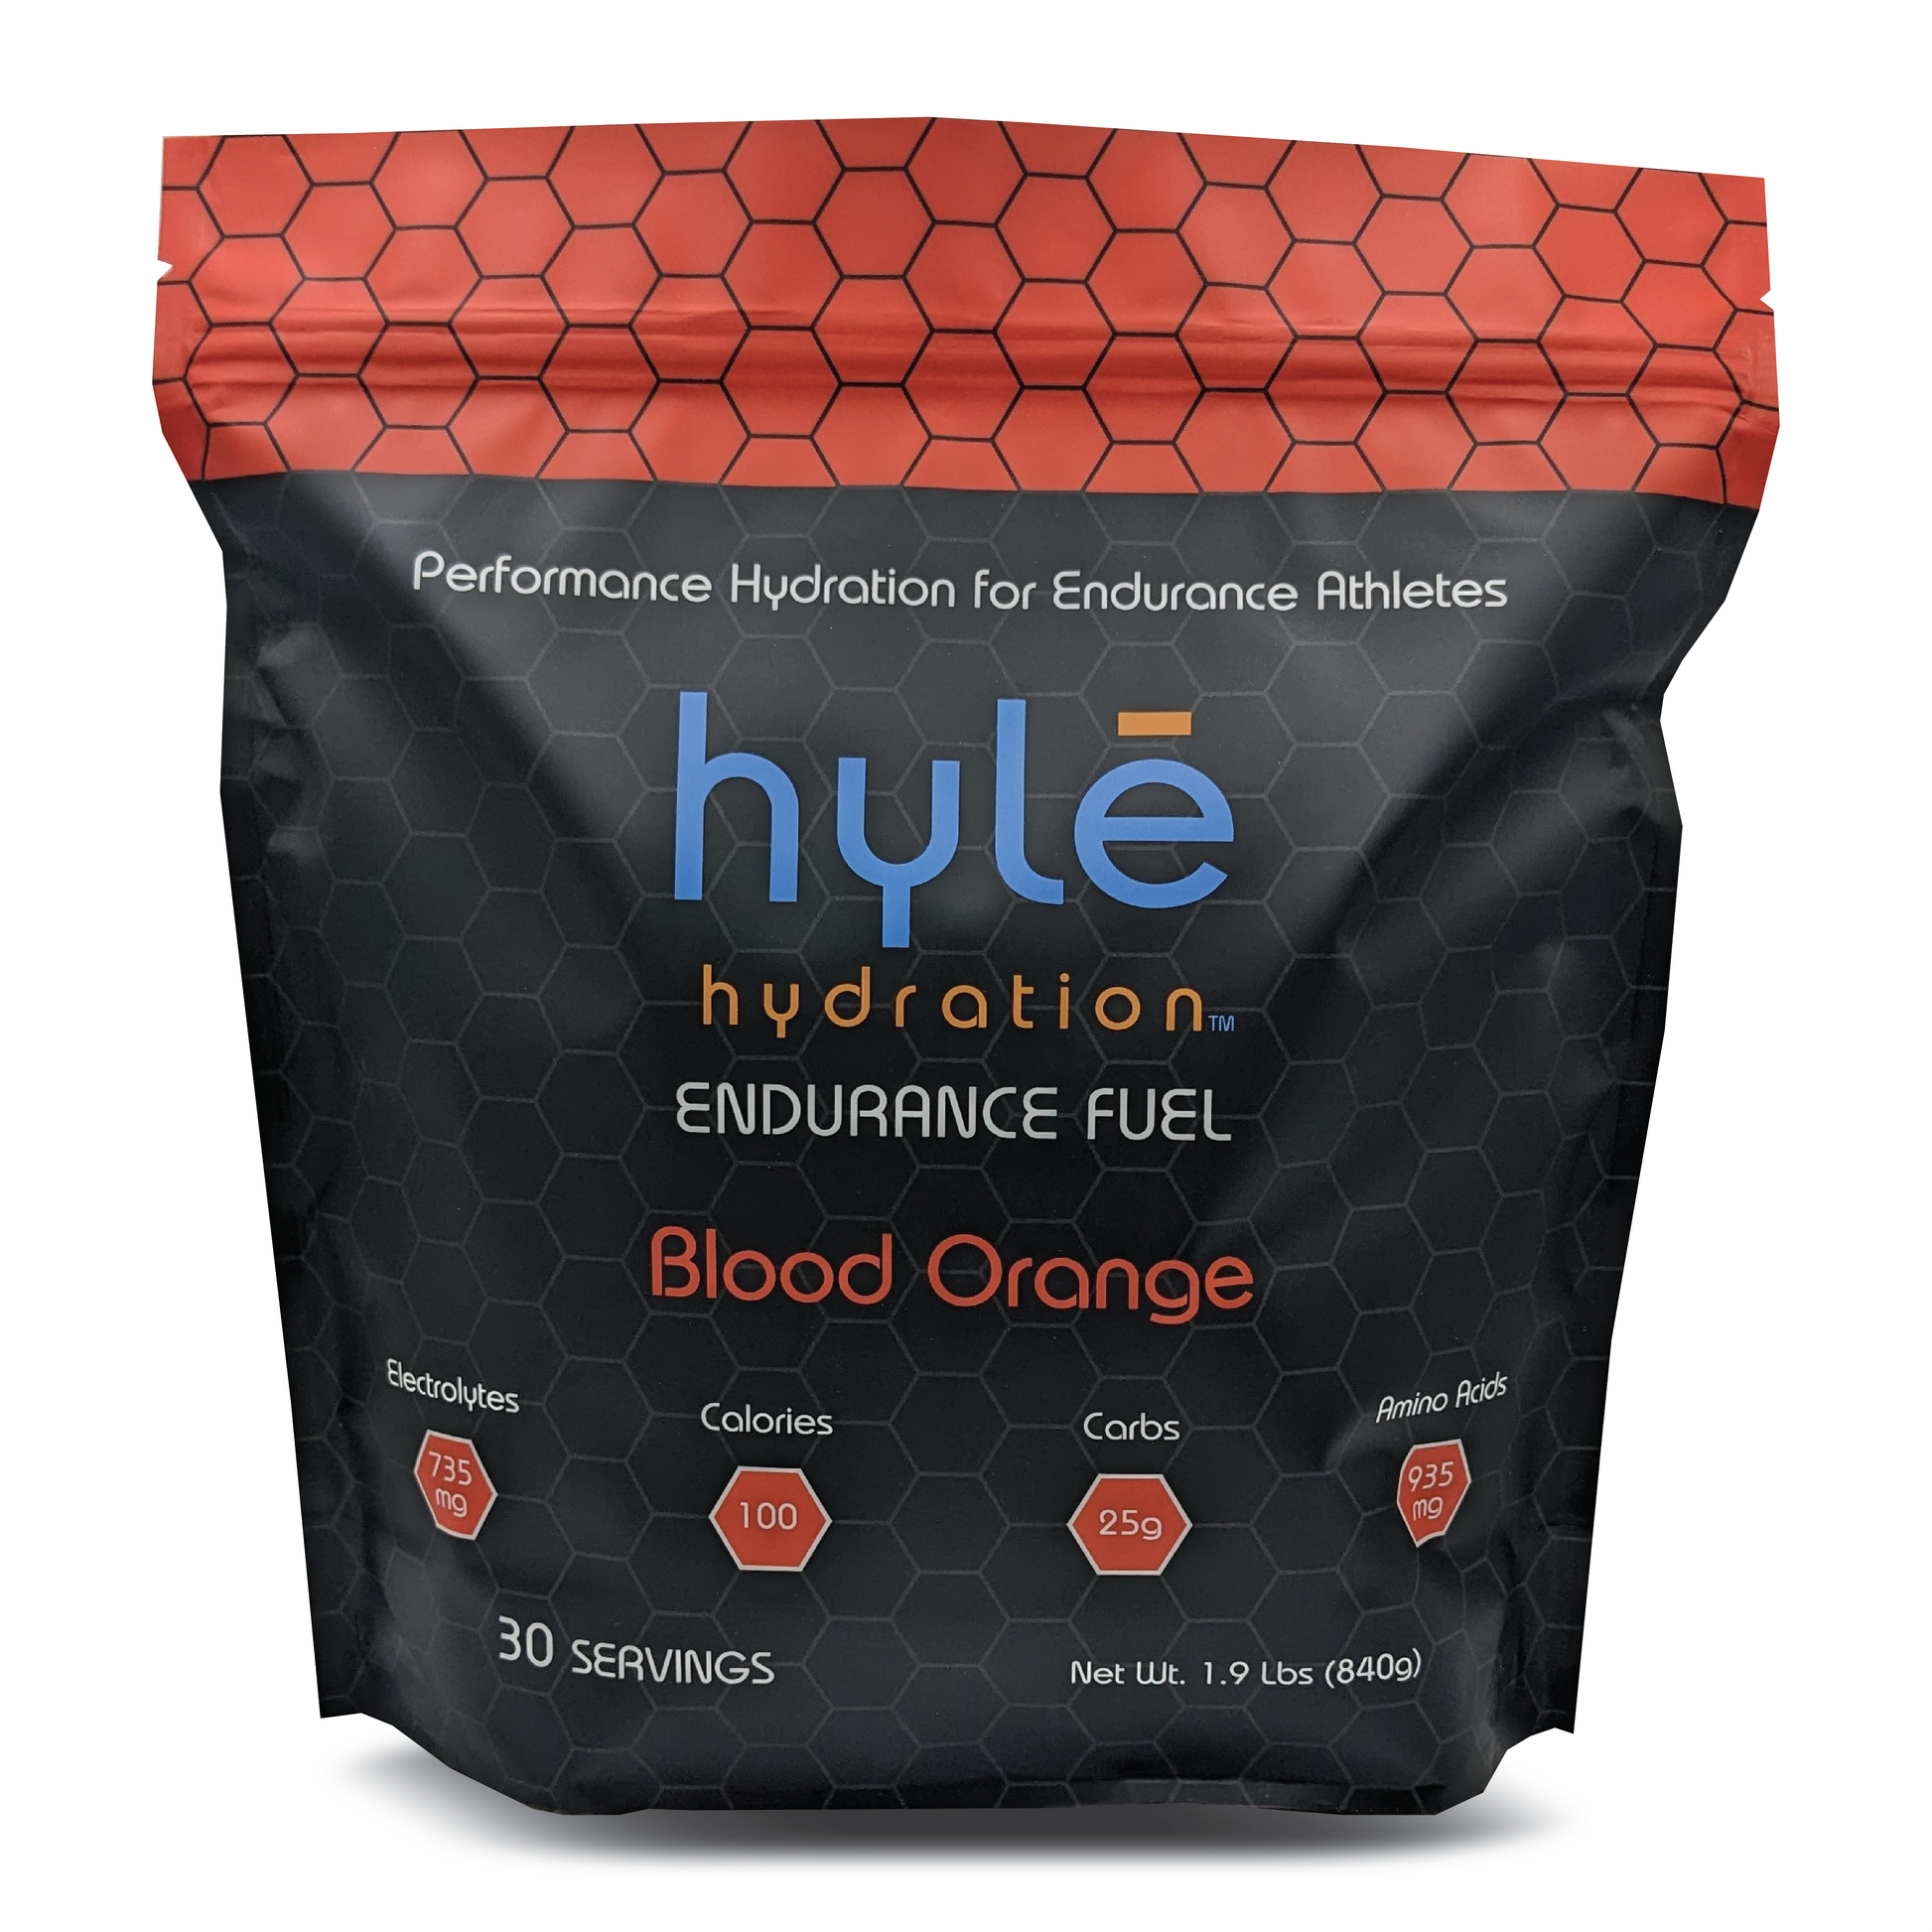 30 serving bag of Hyle Hydration Endurance Fuel Blood Orange Flavor. Hyle Hydration Endurance Fuel is a powdered sports drink mix with carbohydrates, electrolytes, and amino acids.